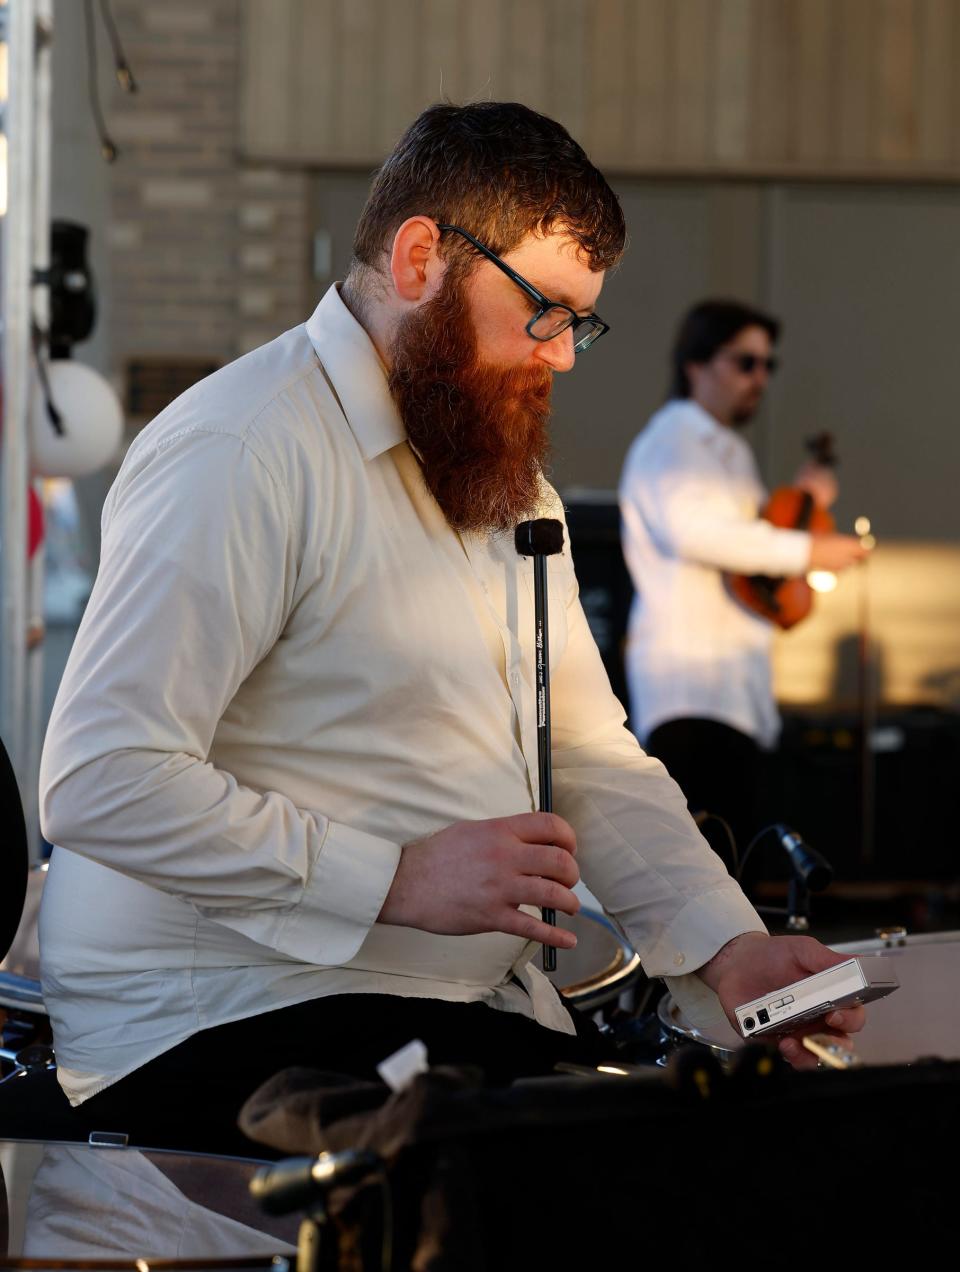 Jamie Whitmarsh tunes his tympani drums July 3 before the start of the annual Oklahoma City Philharmonic outdoor Independence Day concert "Red, White & Boom!" at Scissortail Park in downtown Oklahoma City.